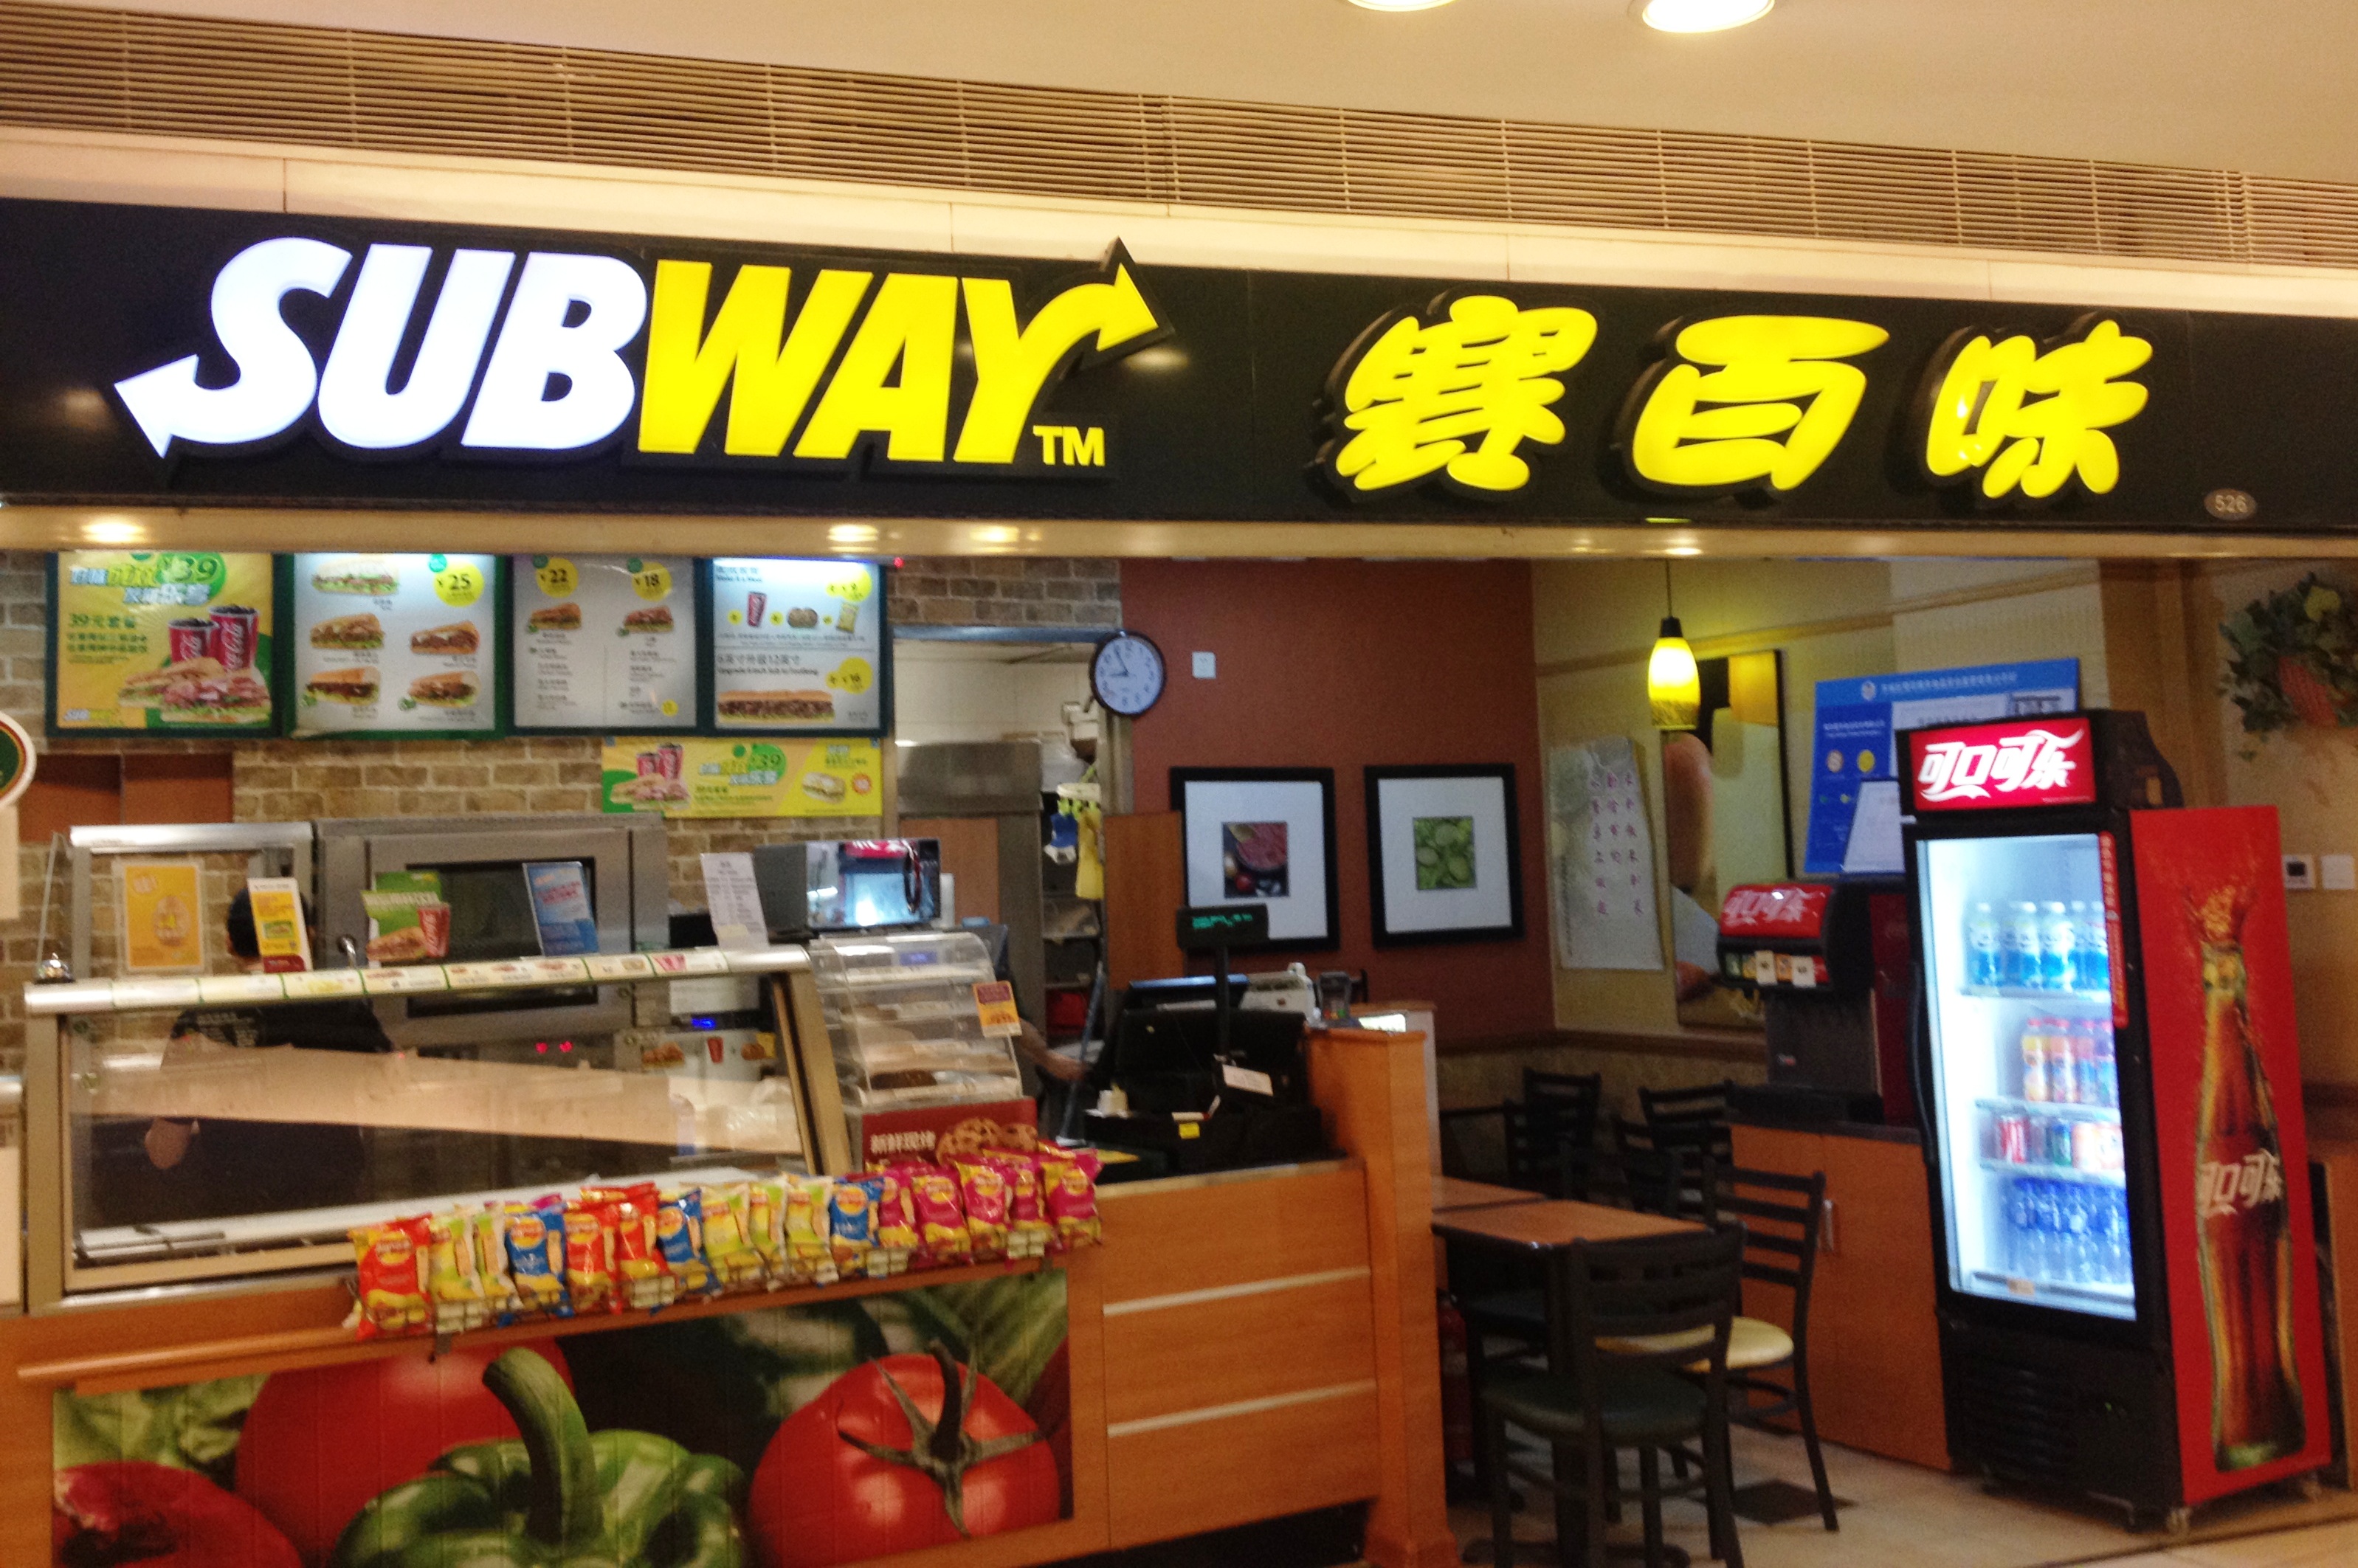 They even had Subway in Beijing mall.jpg